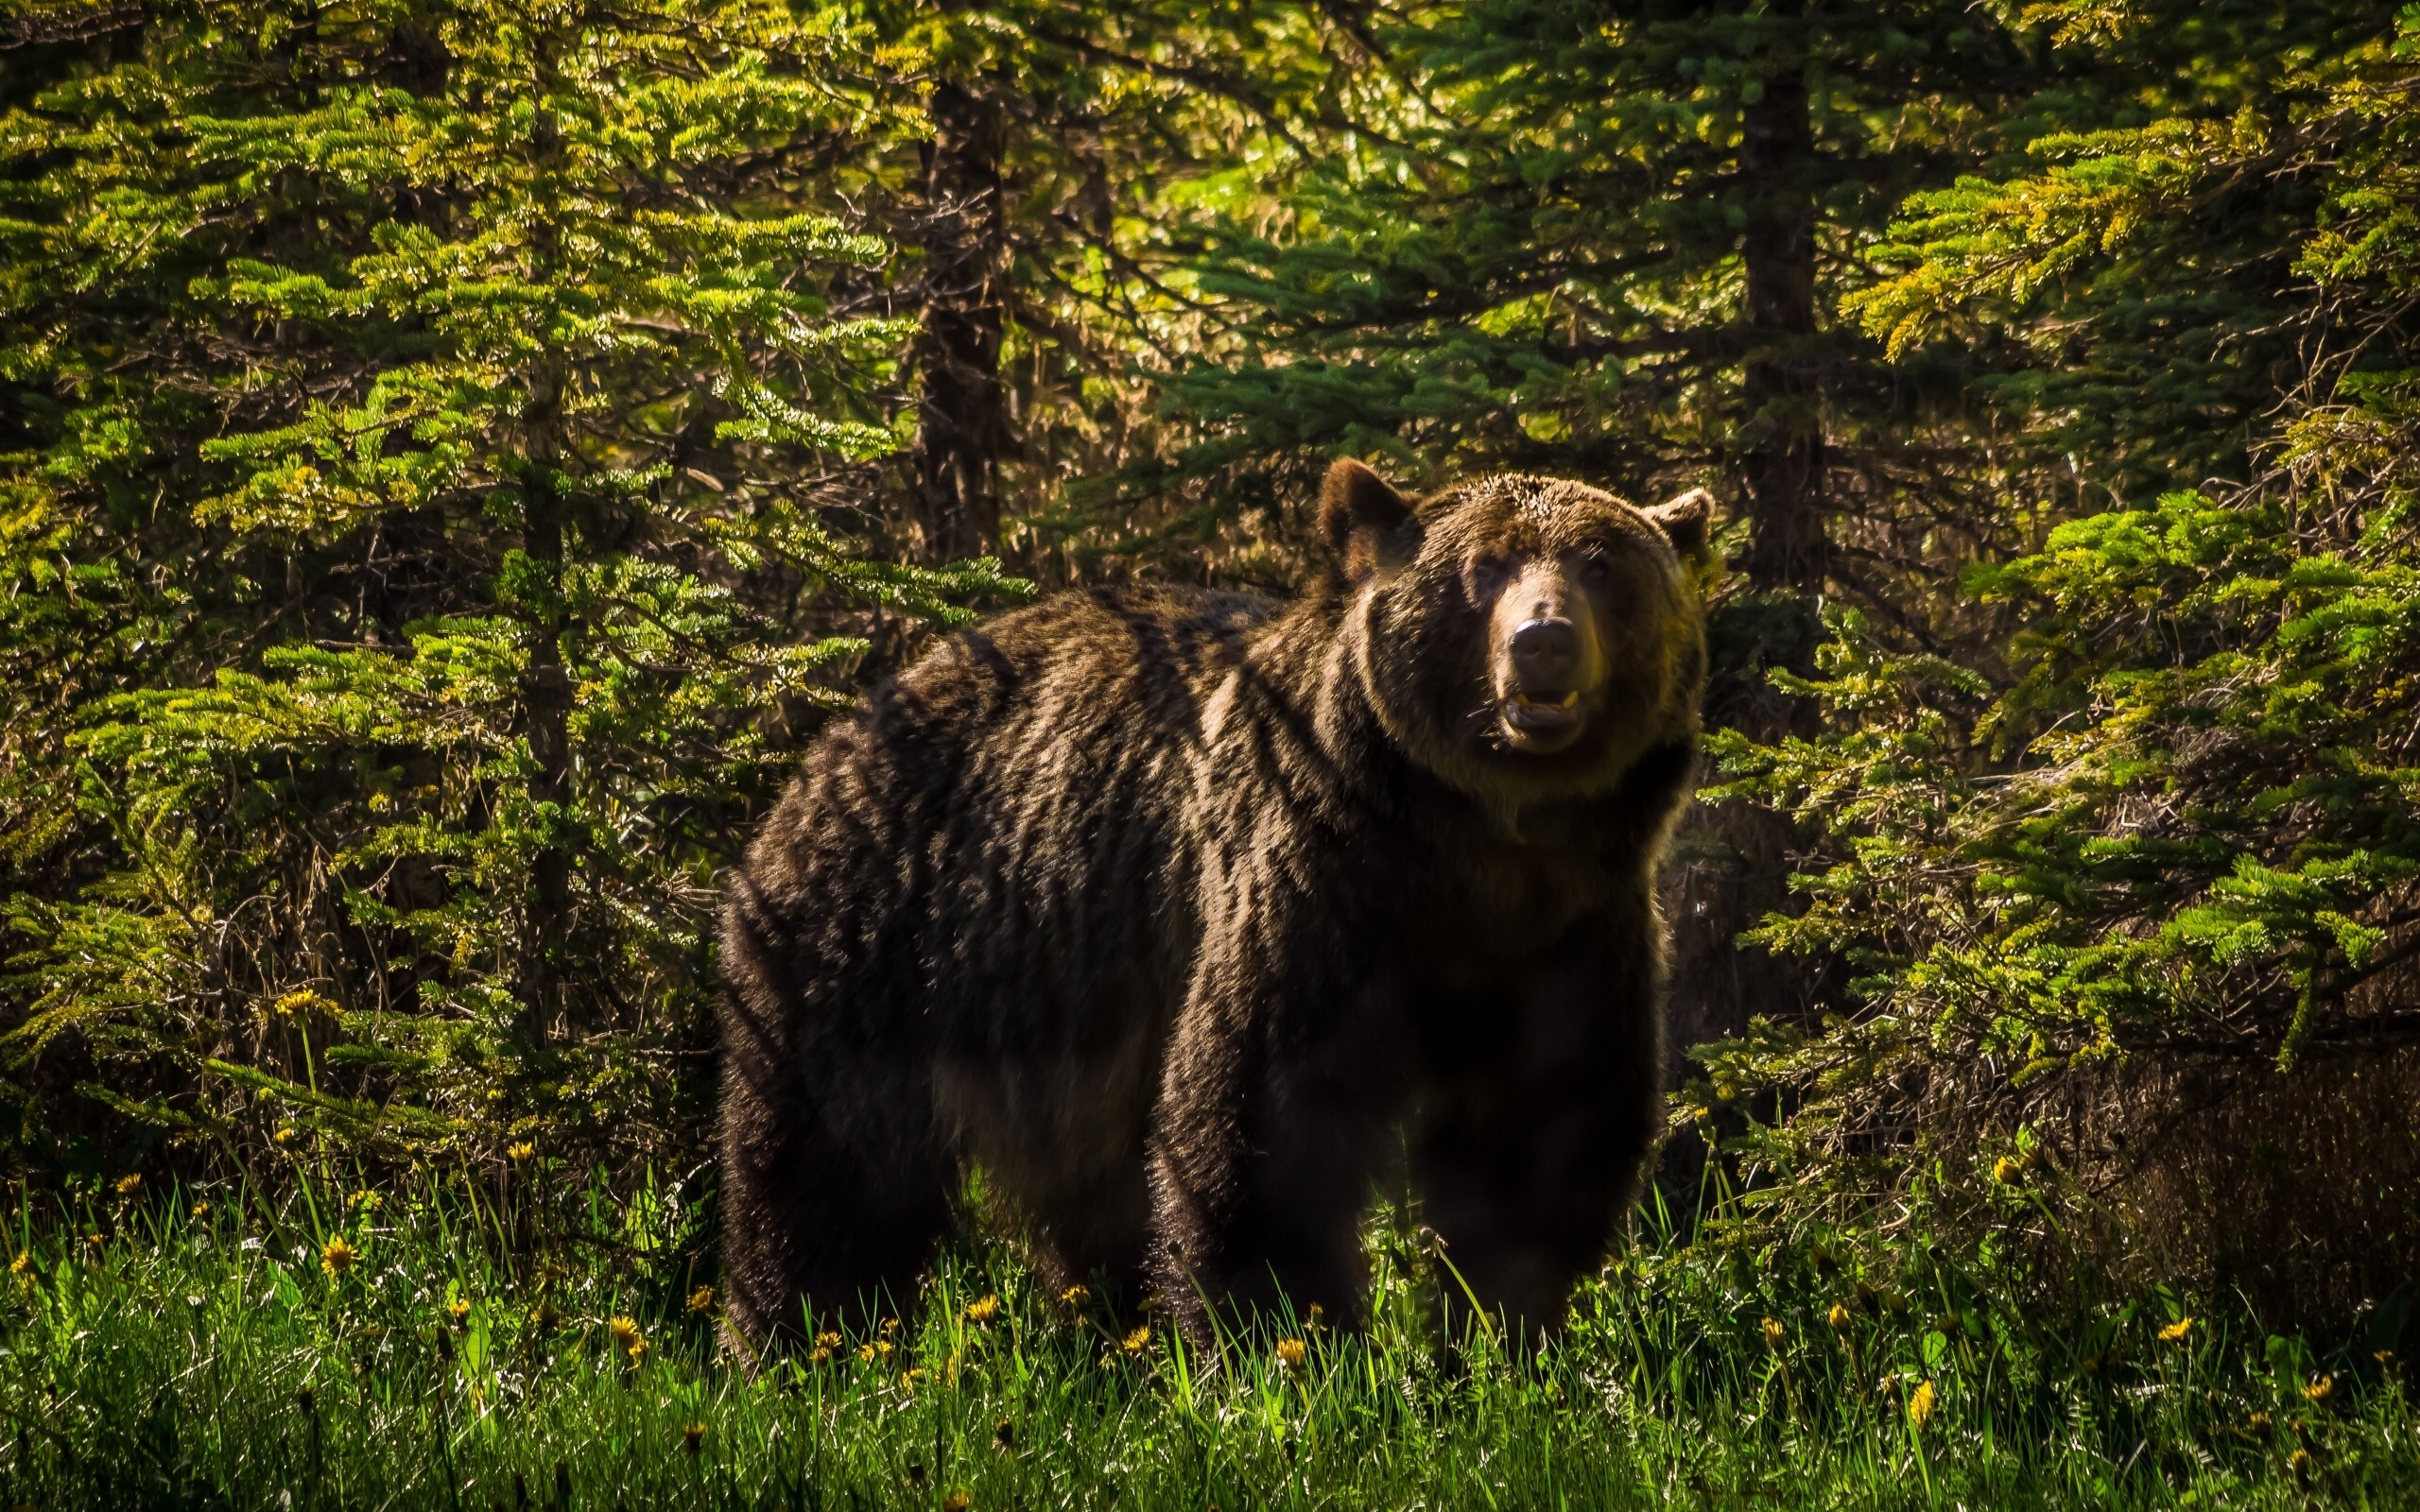 fond d'écran grizzly,ours brun,ours,grizzly,animal terrestre,faune